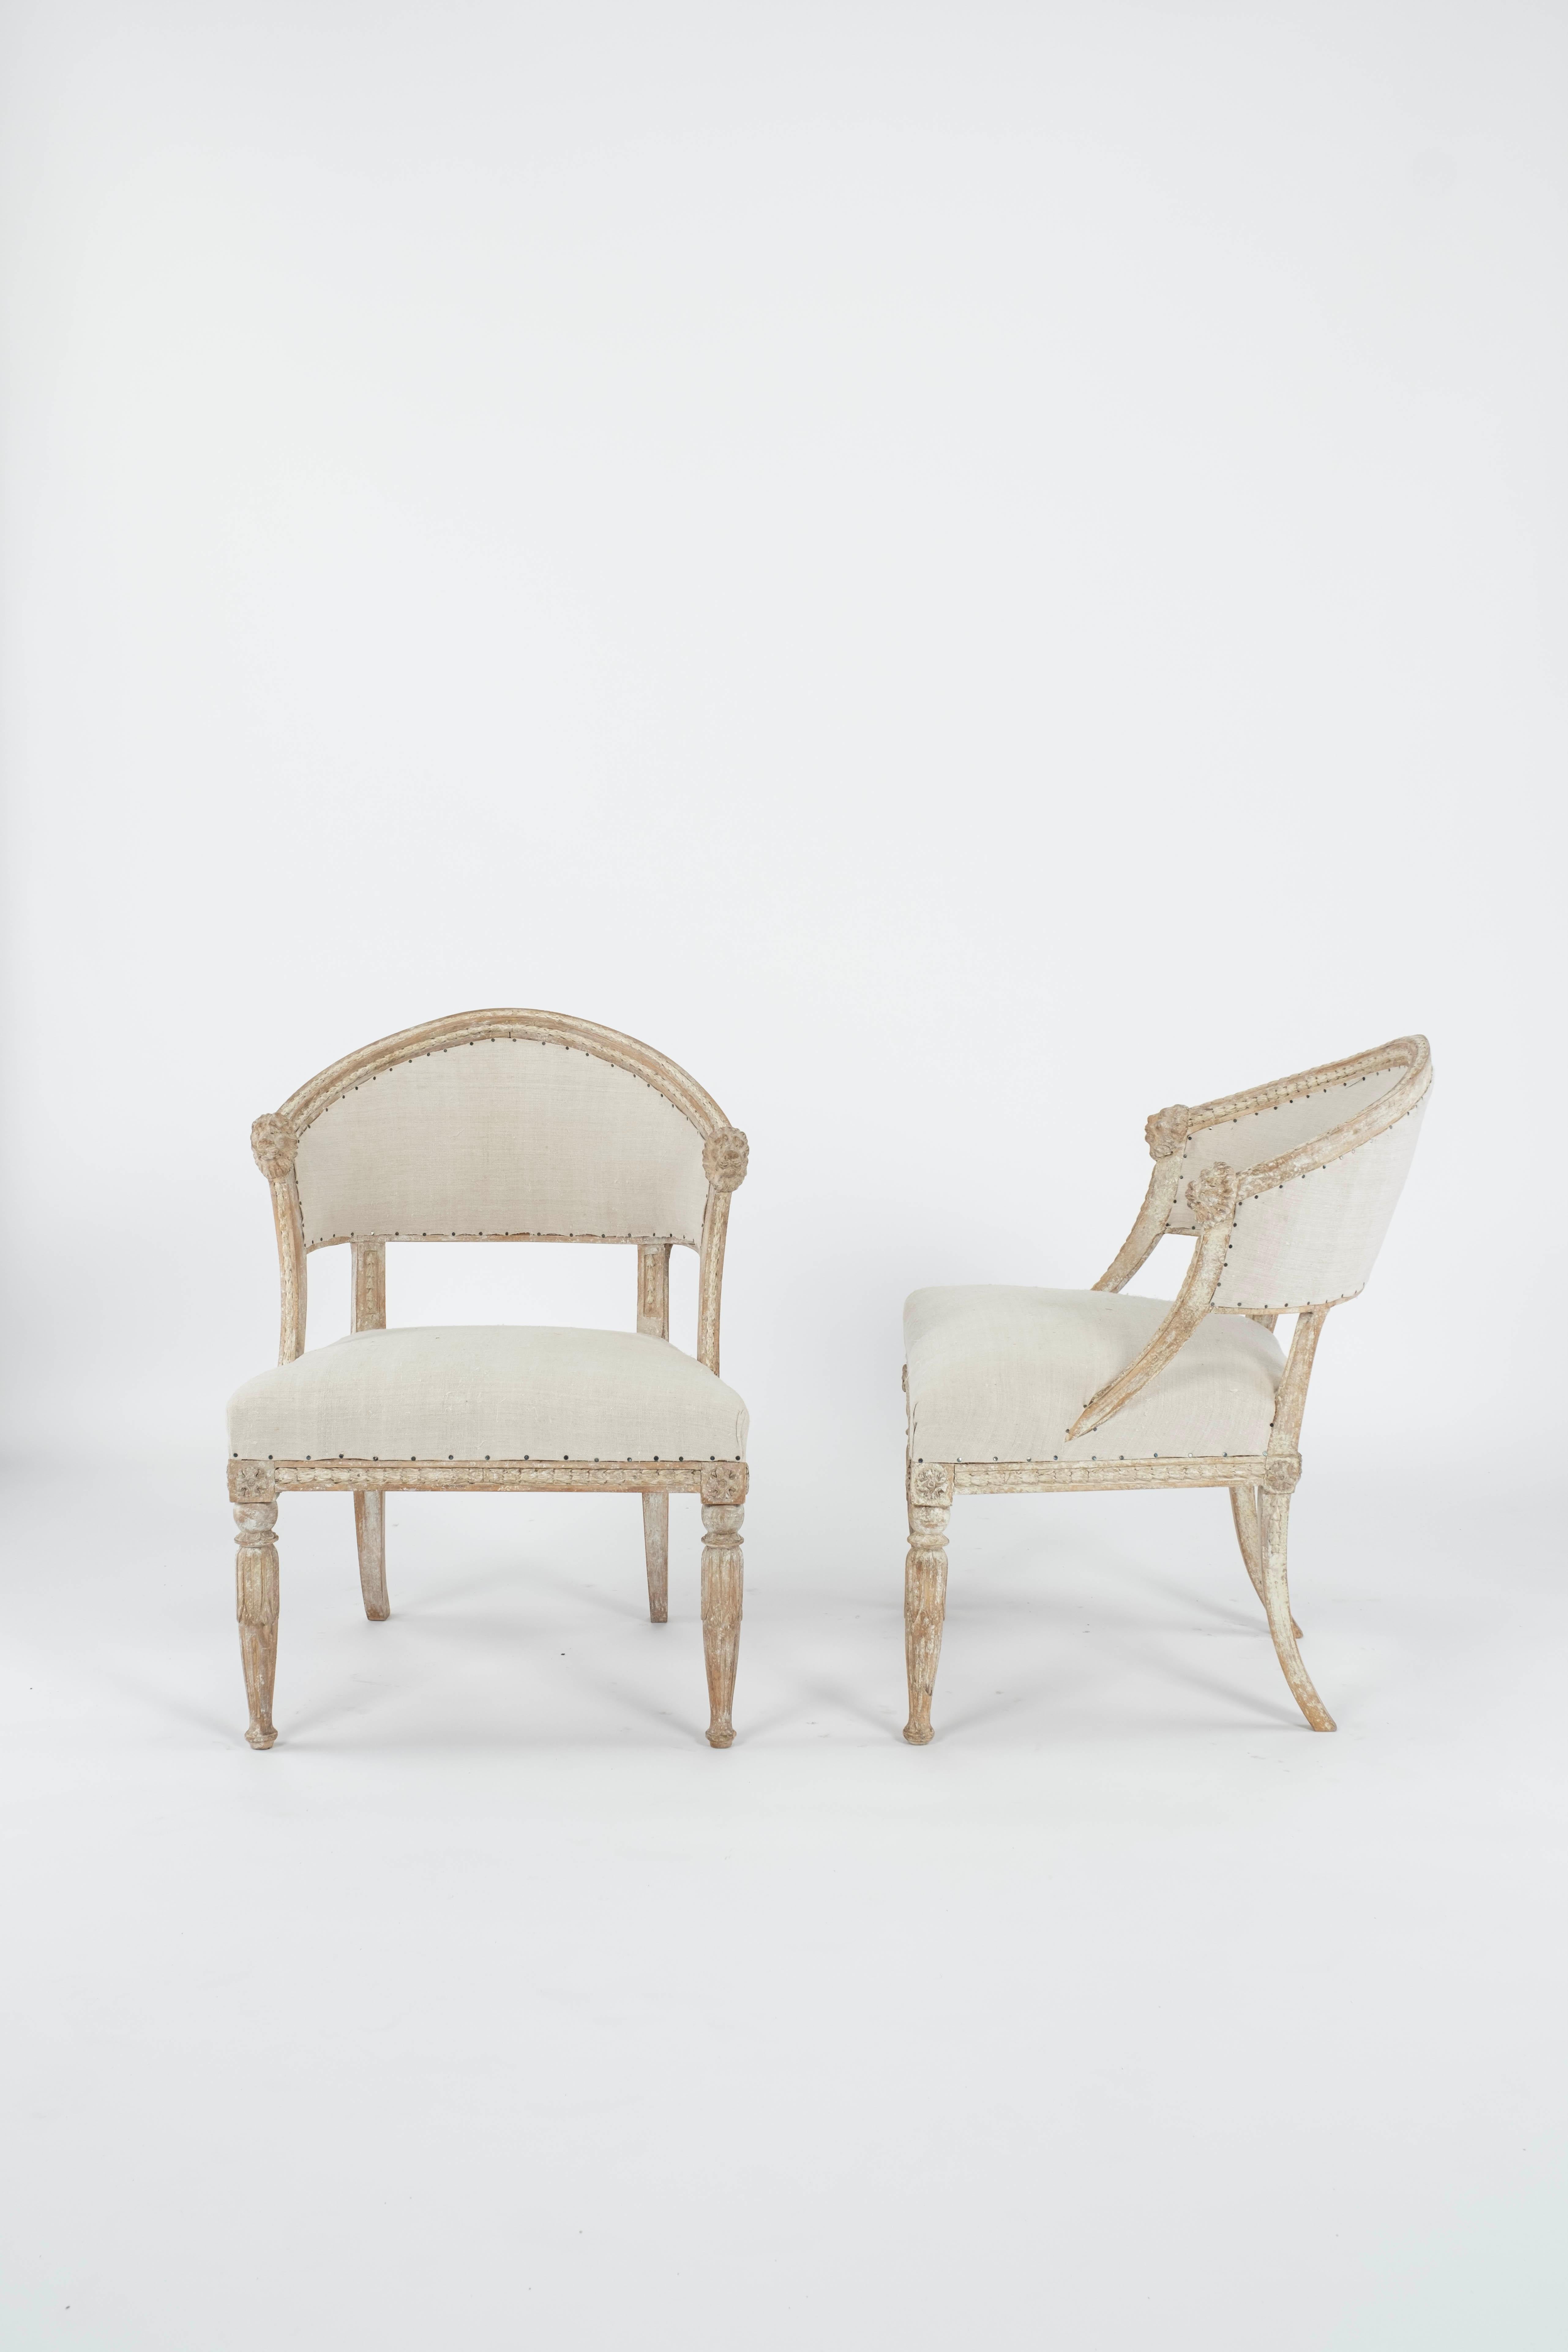 Pair of 19th C. Swedish Gustavian Barrel Back Chairs For Sale 2